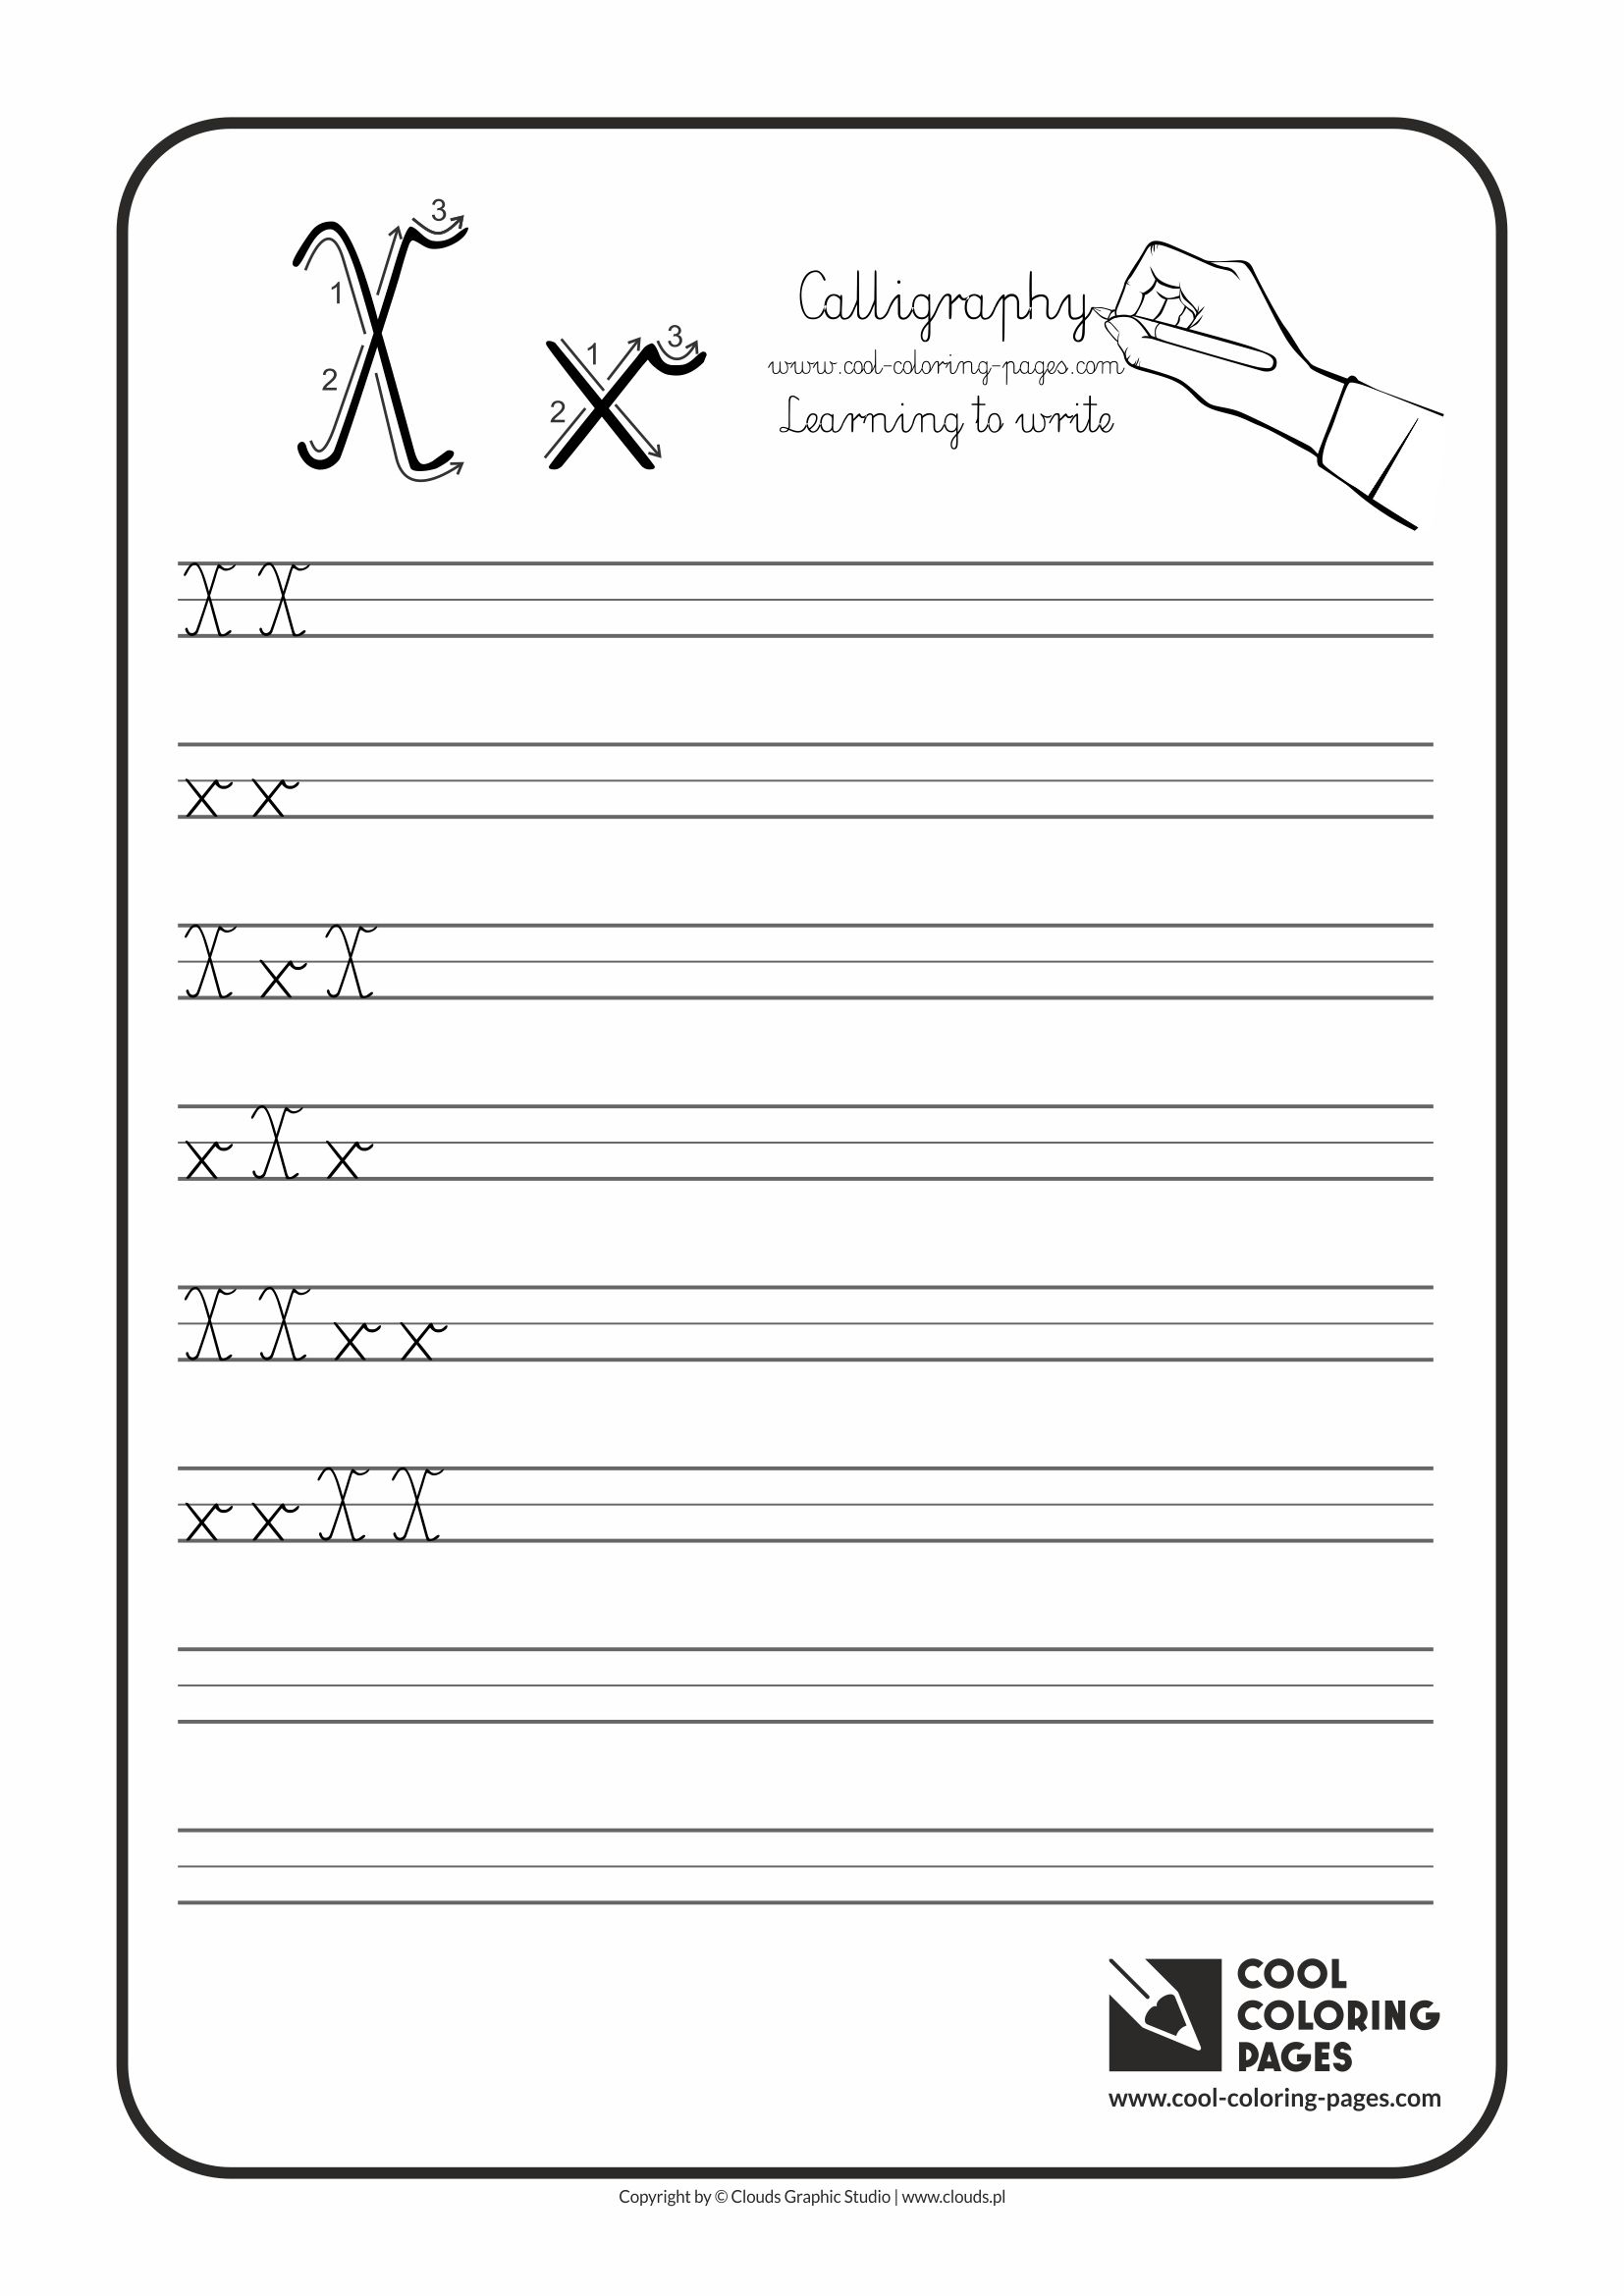 Cool Coloring Pages / Calligraphy / Letter X - Handwriting for kids / Worksheets